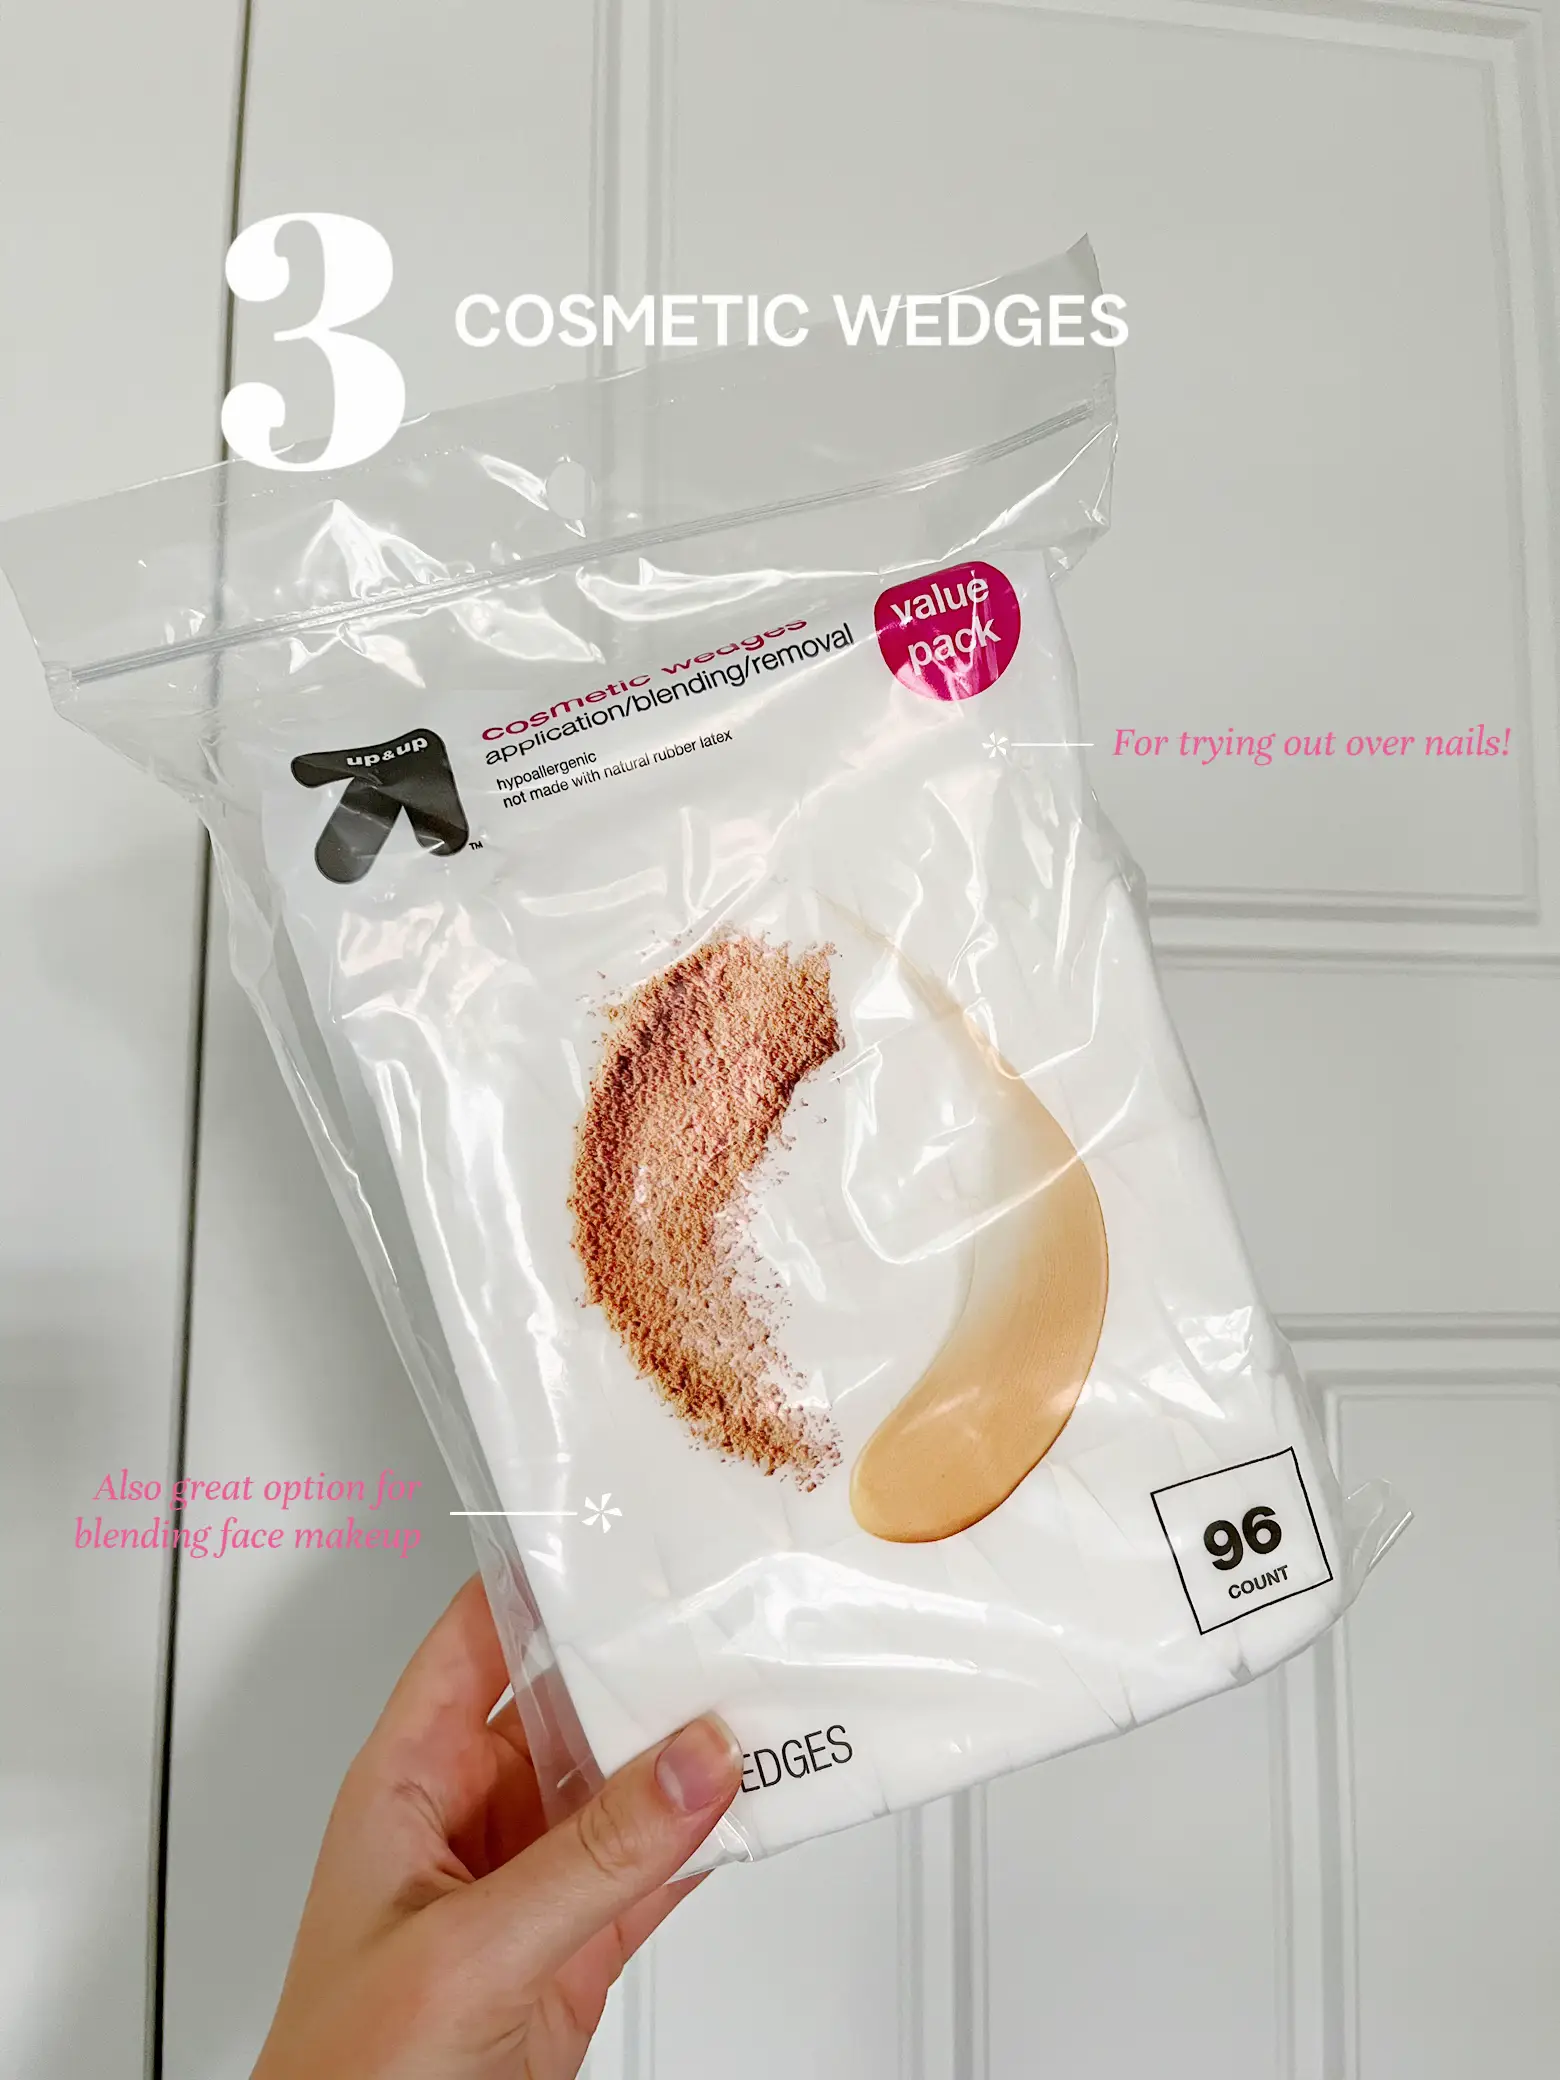 Beauty Wedges - ULTA Beauty Collection